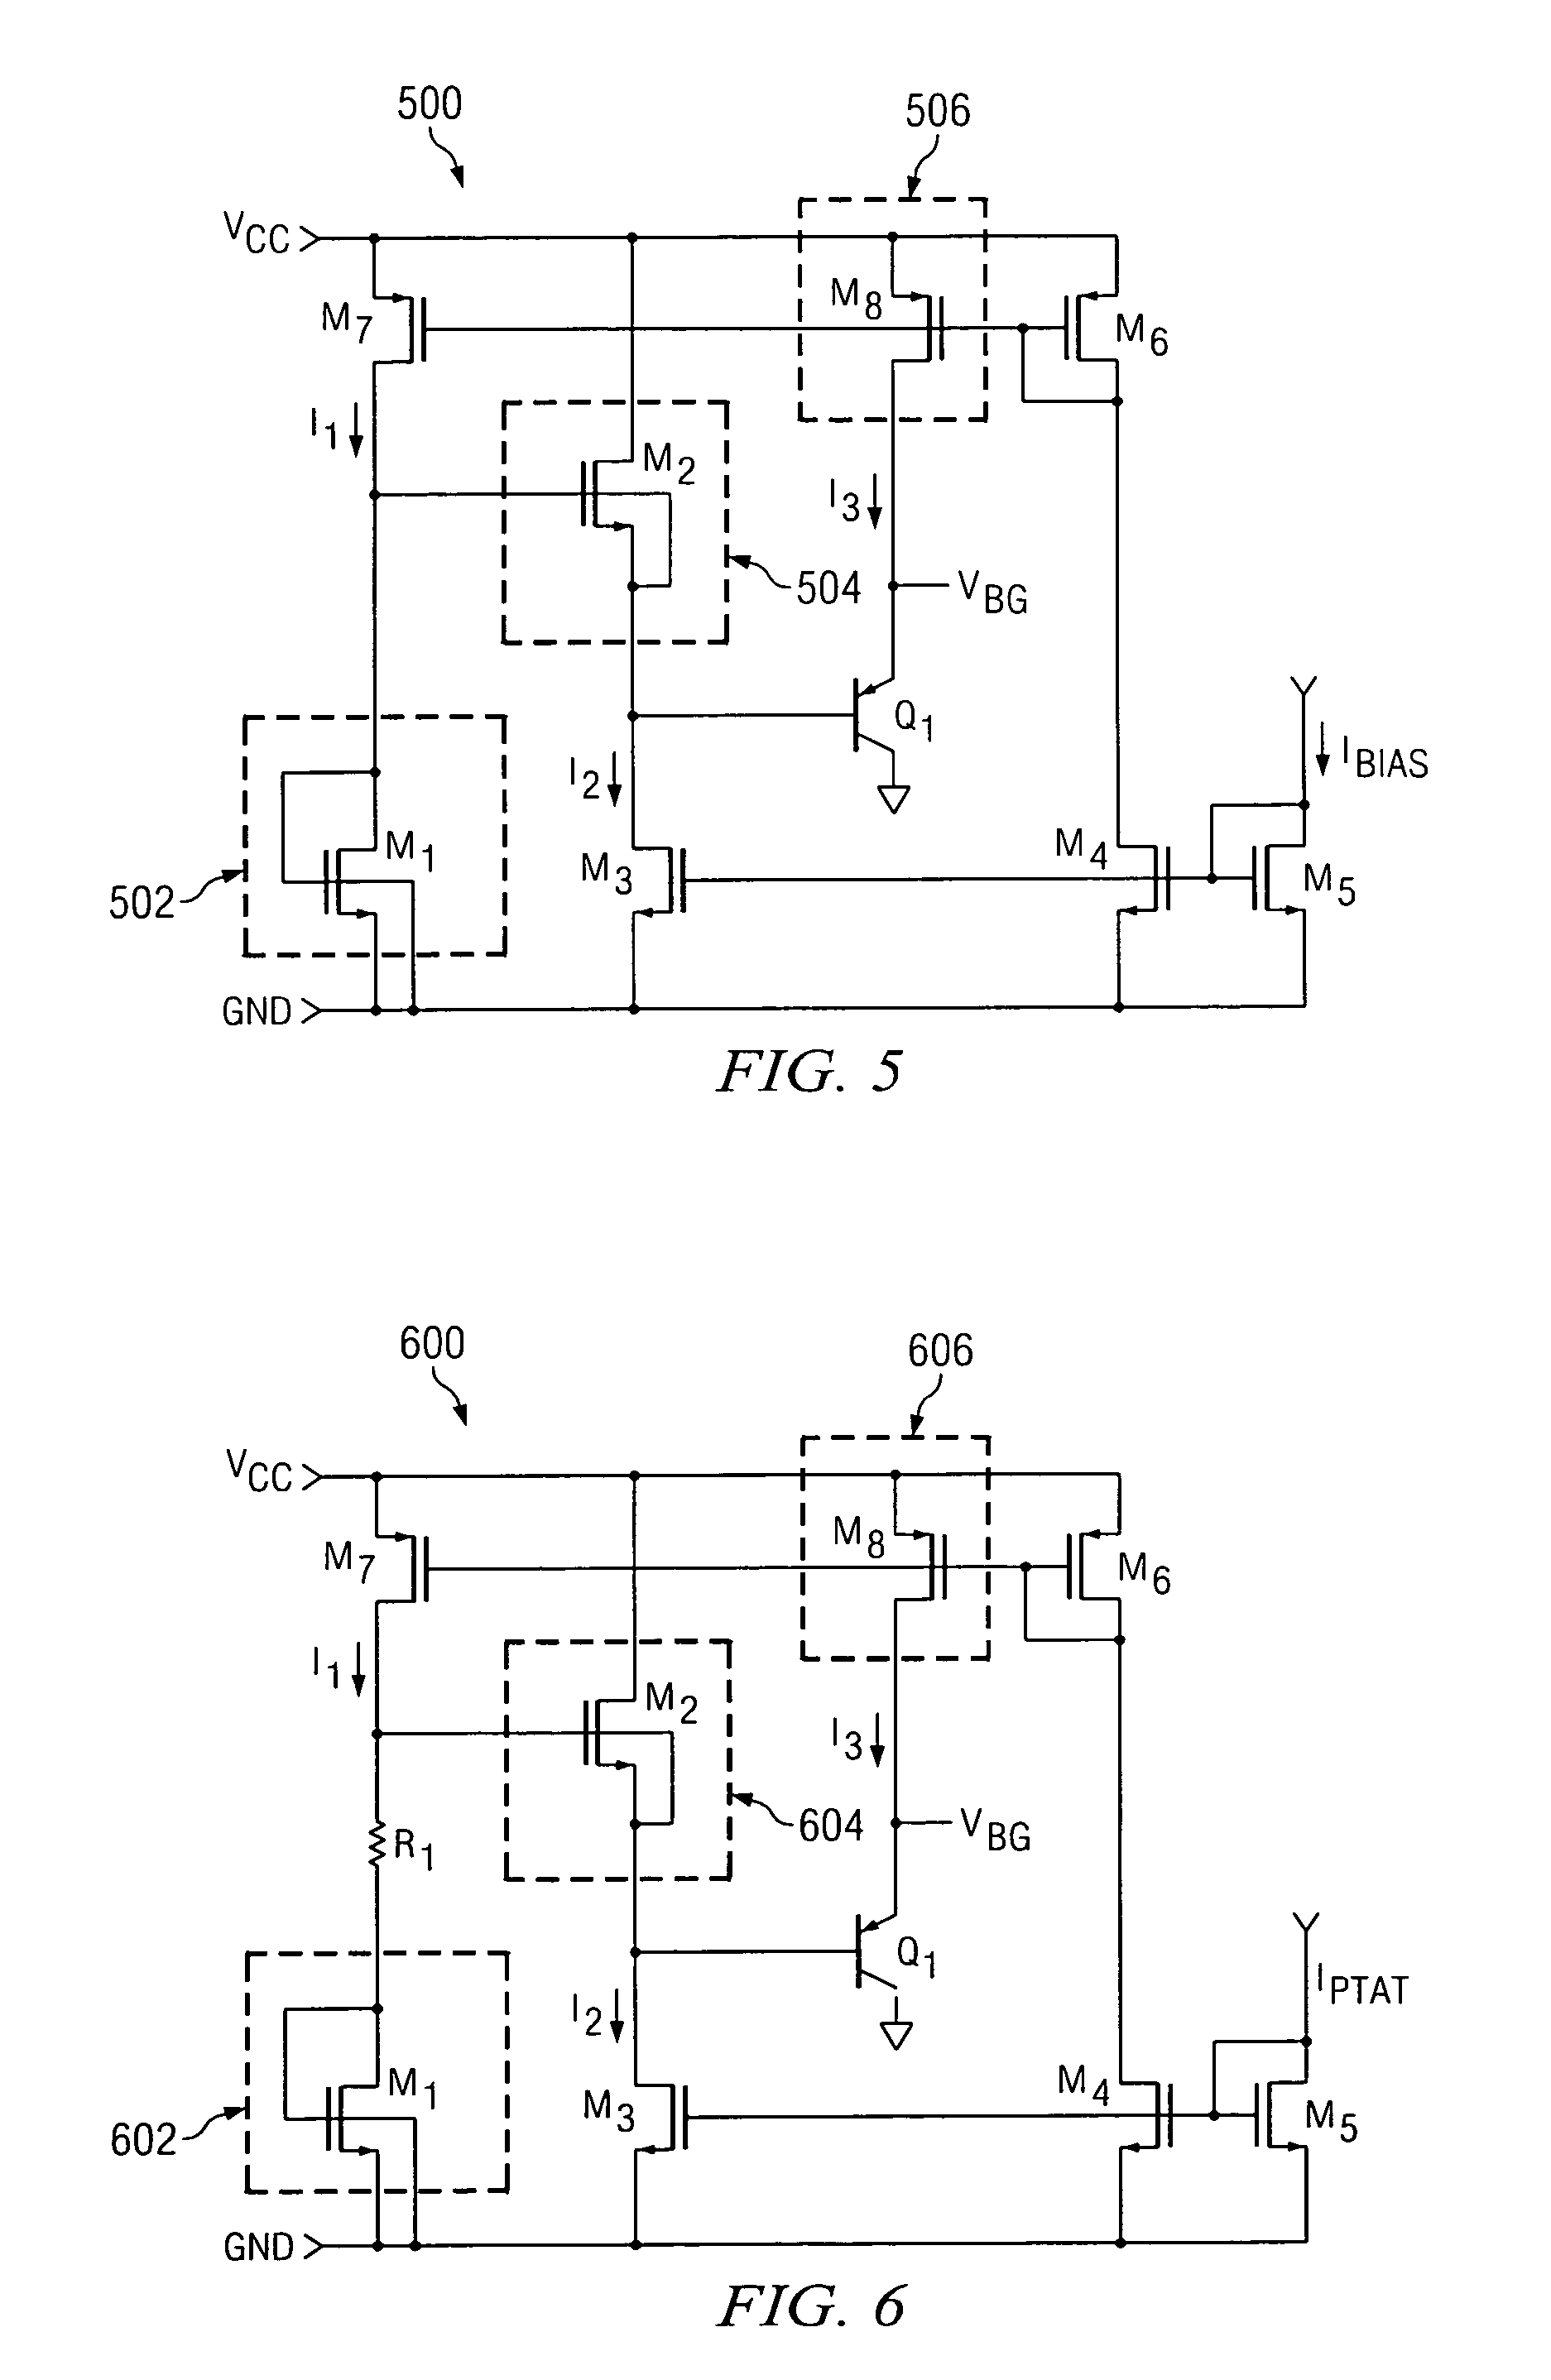 Bandgap reference circuit for ultra-low current applications